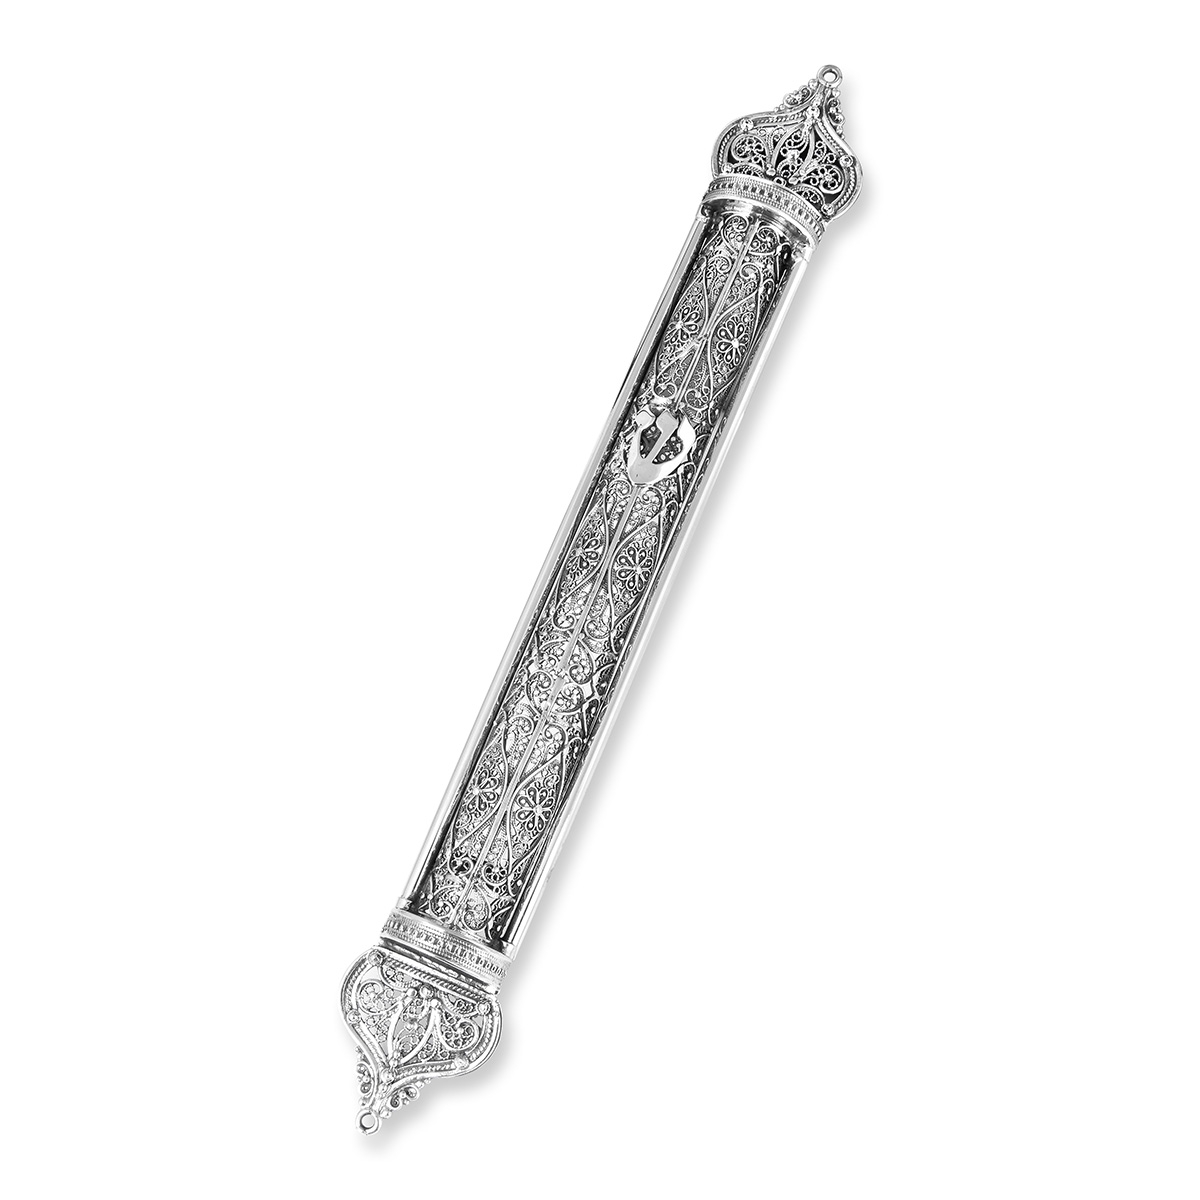 Traditional Yemenite Art Handcrafted Sterling Silver Extra Large Mezuzah Case With Refined Design - 1